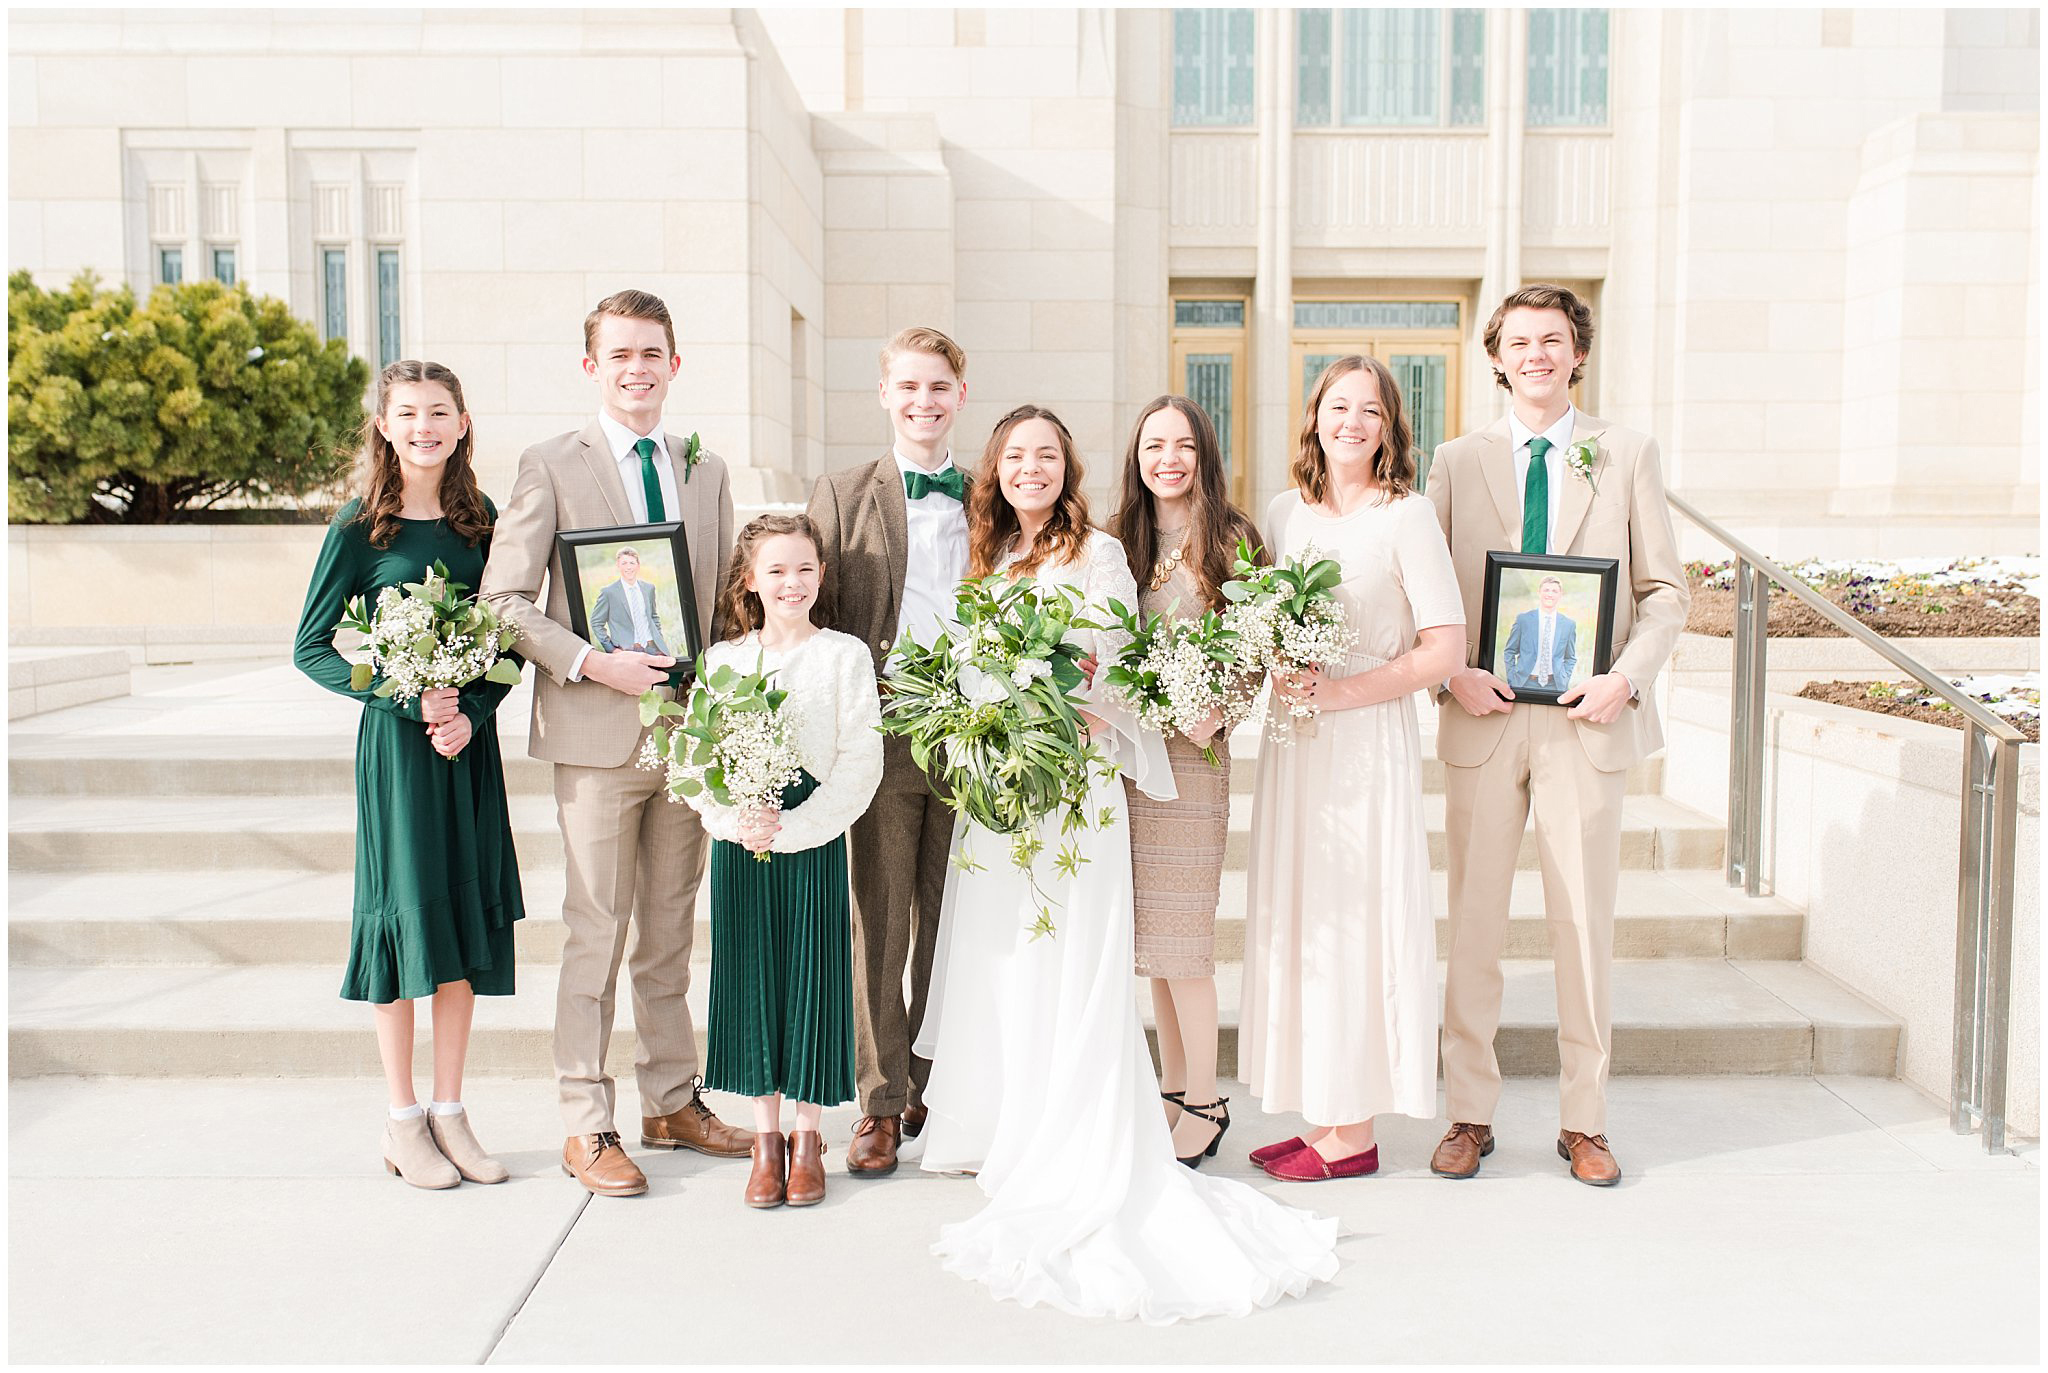 Family portraits during Ogden Temple winter wedding | Brown, Emerald Green, and white wedding | Ogden Temple and Sweet Magnolia Wedding | Jessie and Dallin Photography